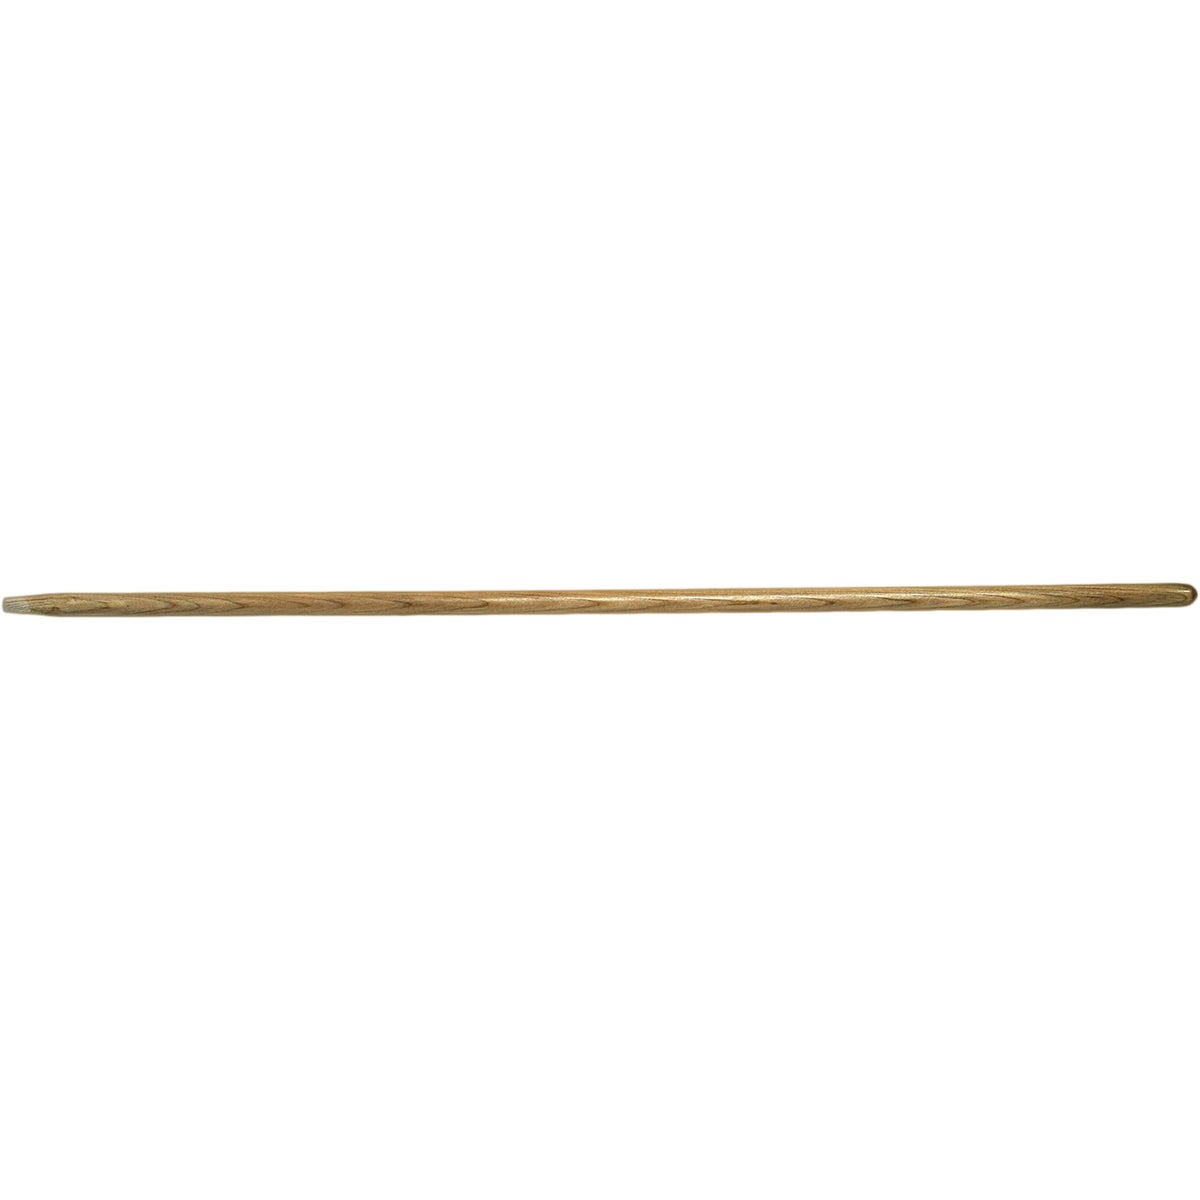 Item 706051, 48 In. Lawn Rake And Leaf Rake Handle. Clear finish, 15/16 In.